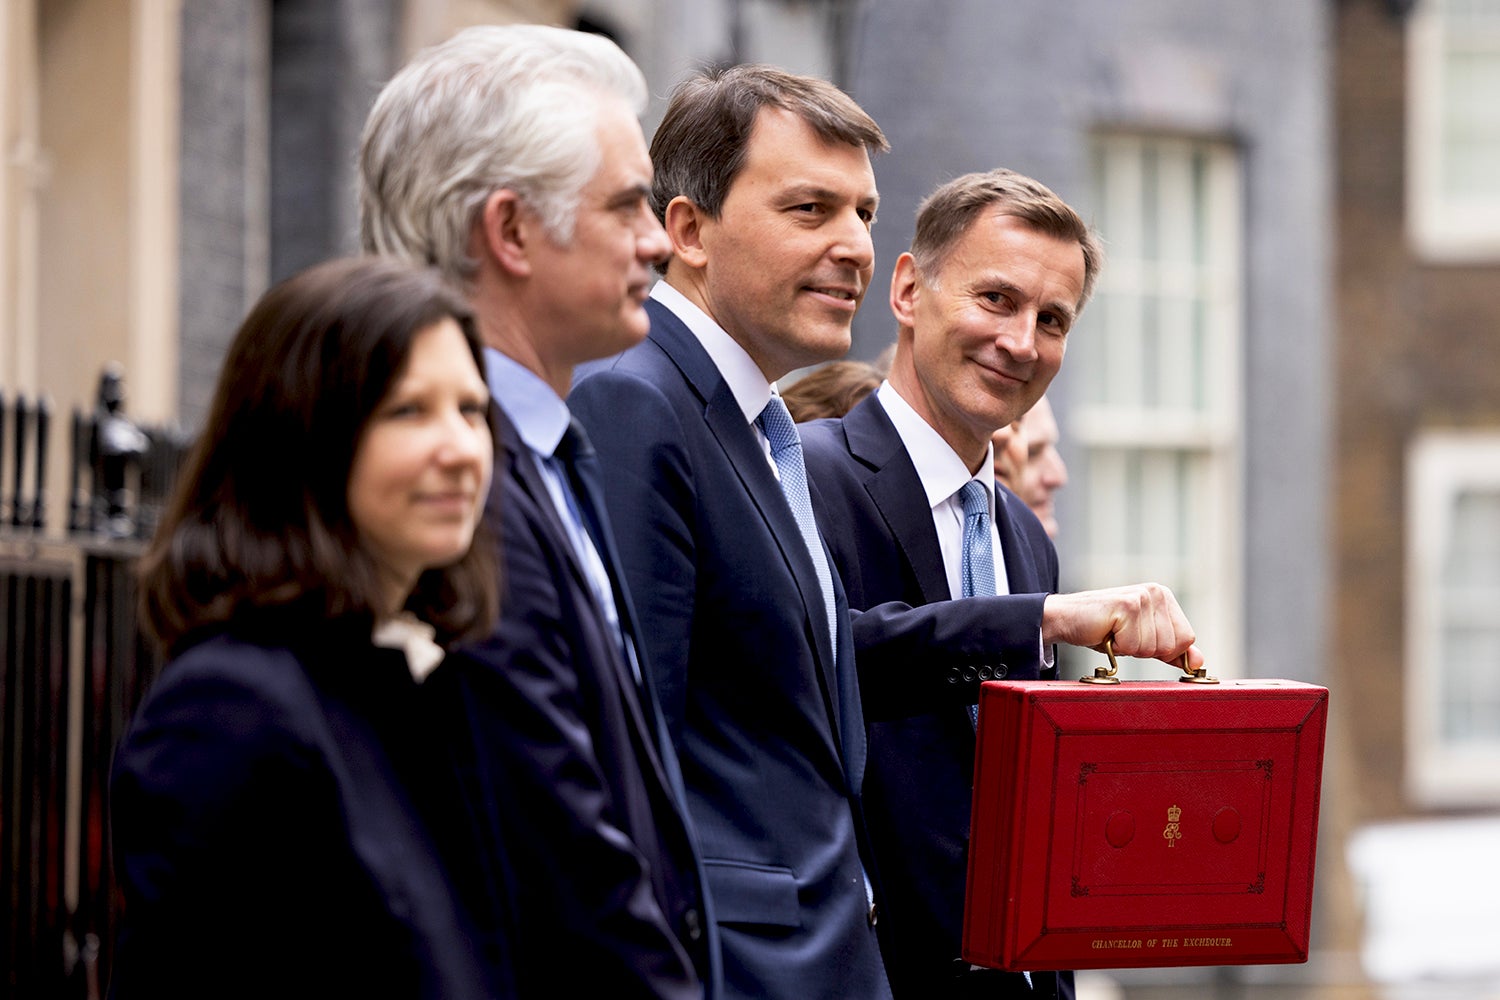 Will the Budget revive the Tories' poll ratings?